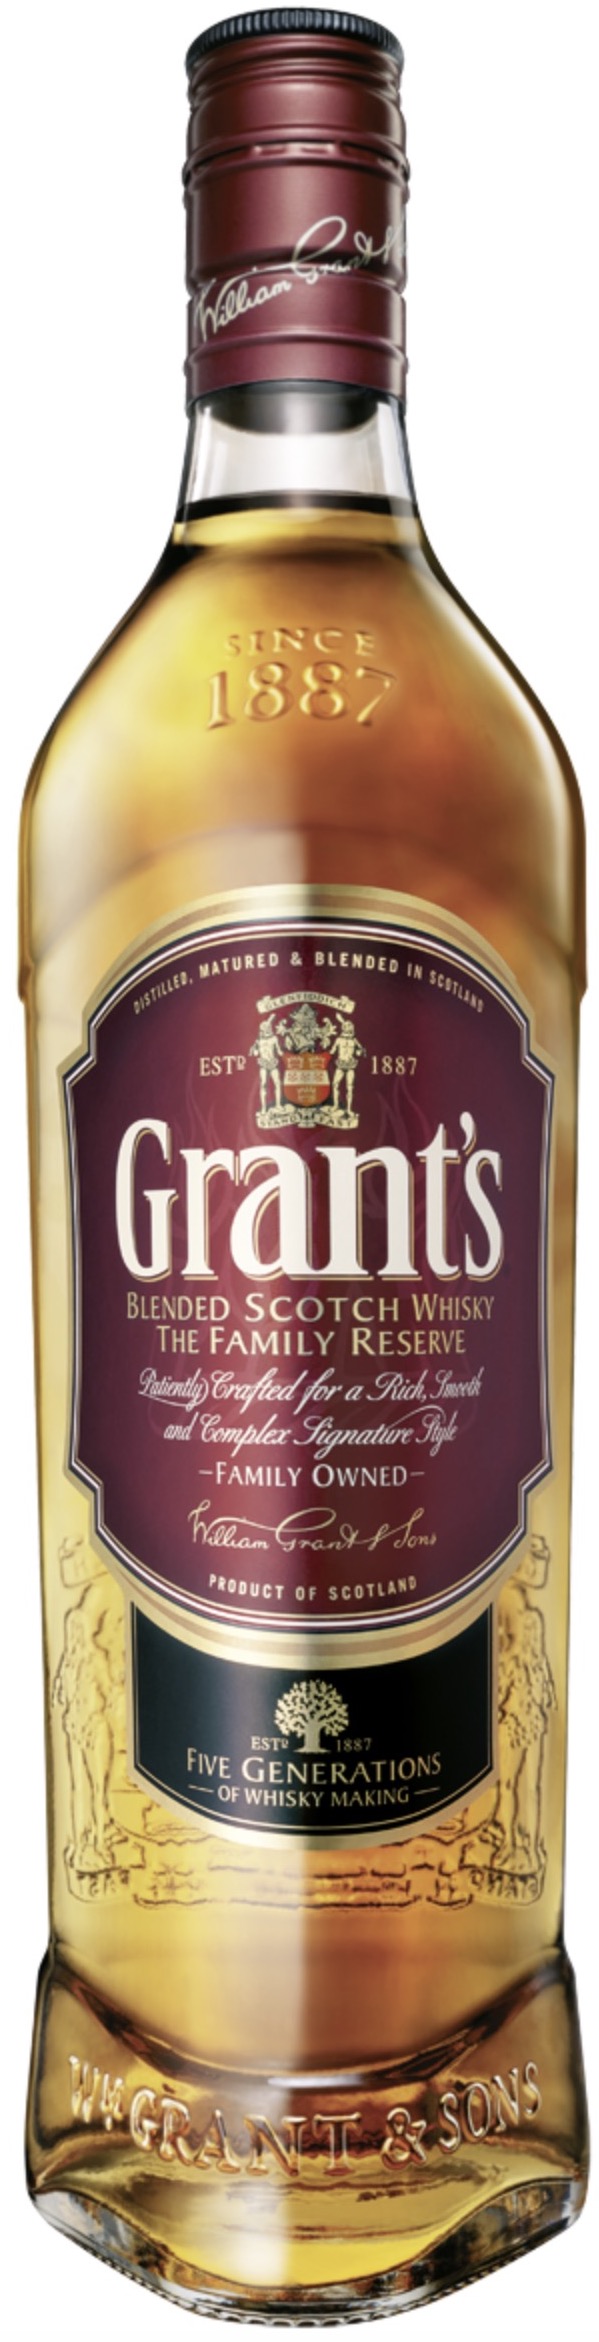 Grant's Blended Scotch Whisky The Family Reserve 40% vol. 0,7L